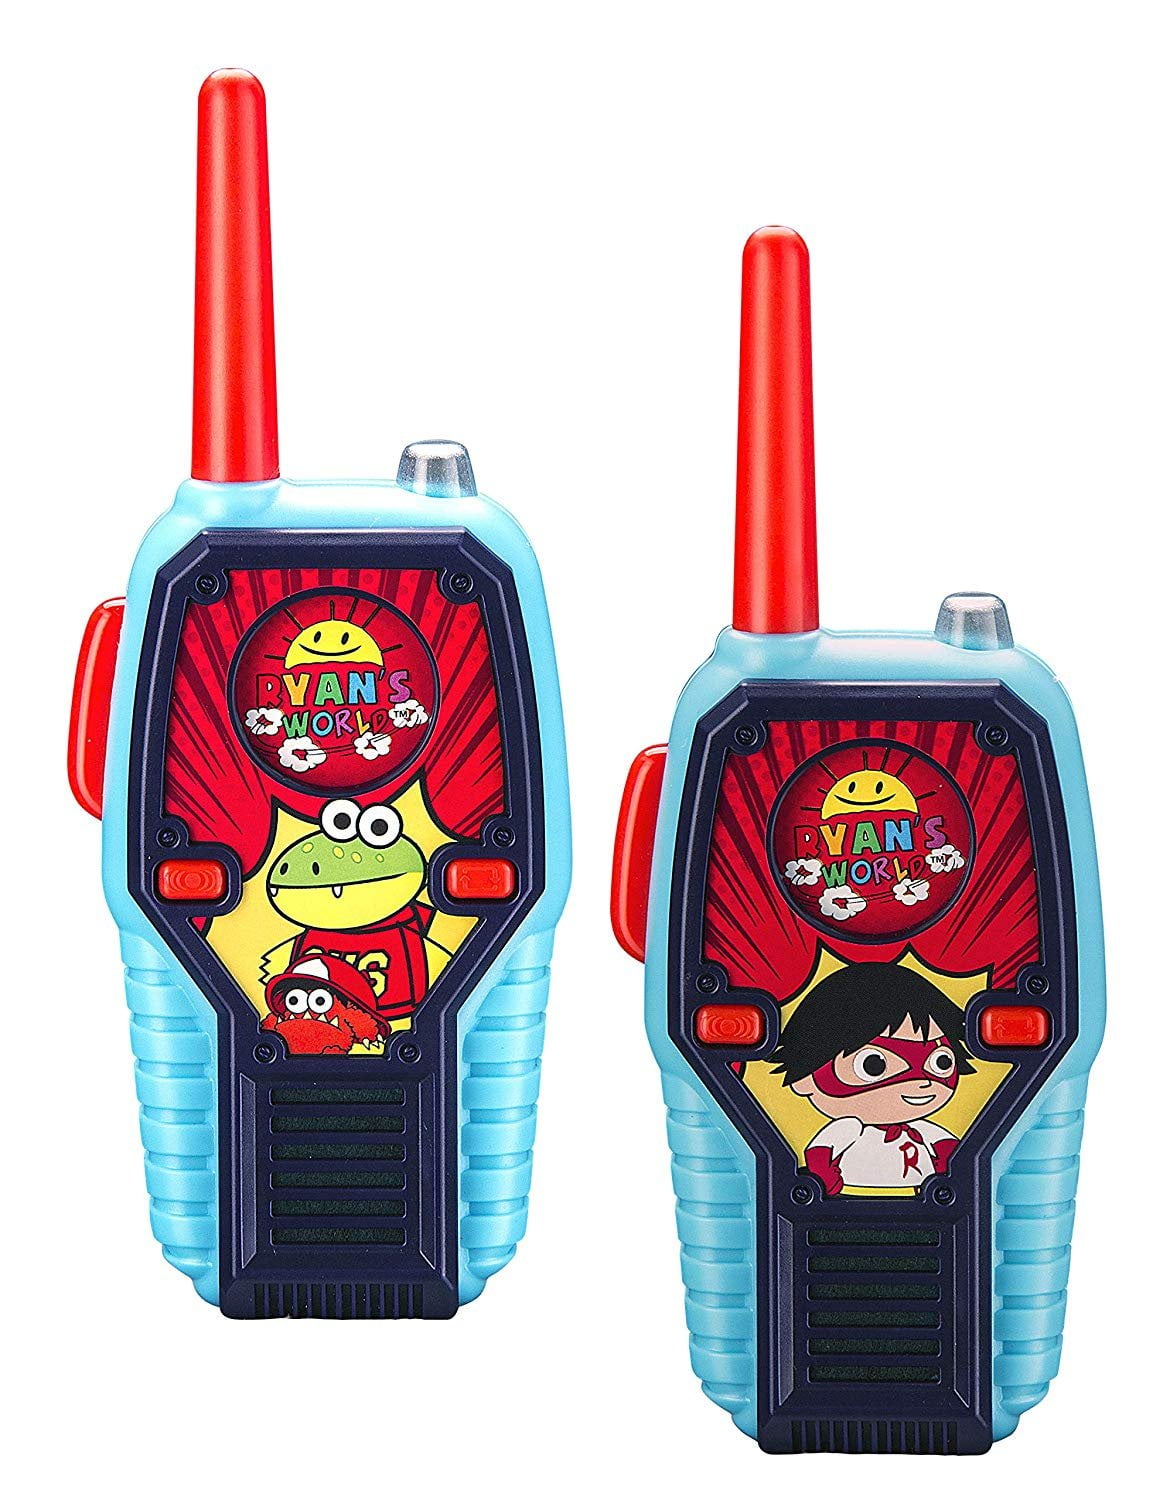 Ryans World Walkie Talkies for Kids with and Sounds Kid Friendly to Use - Walmart.com